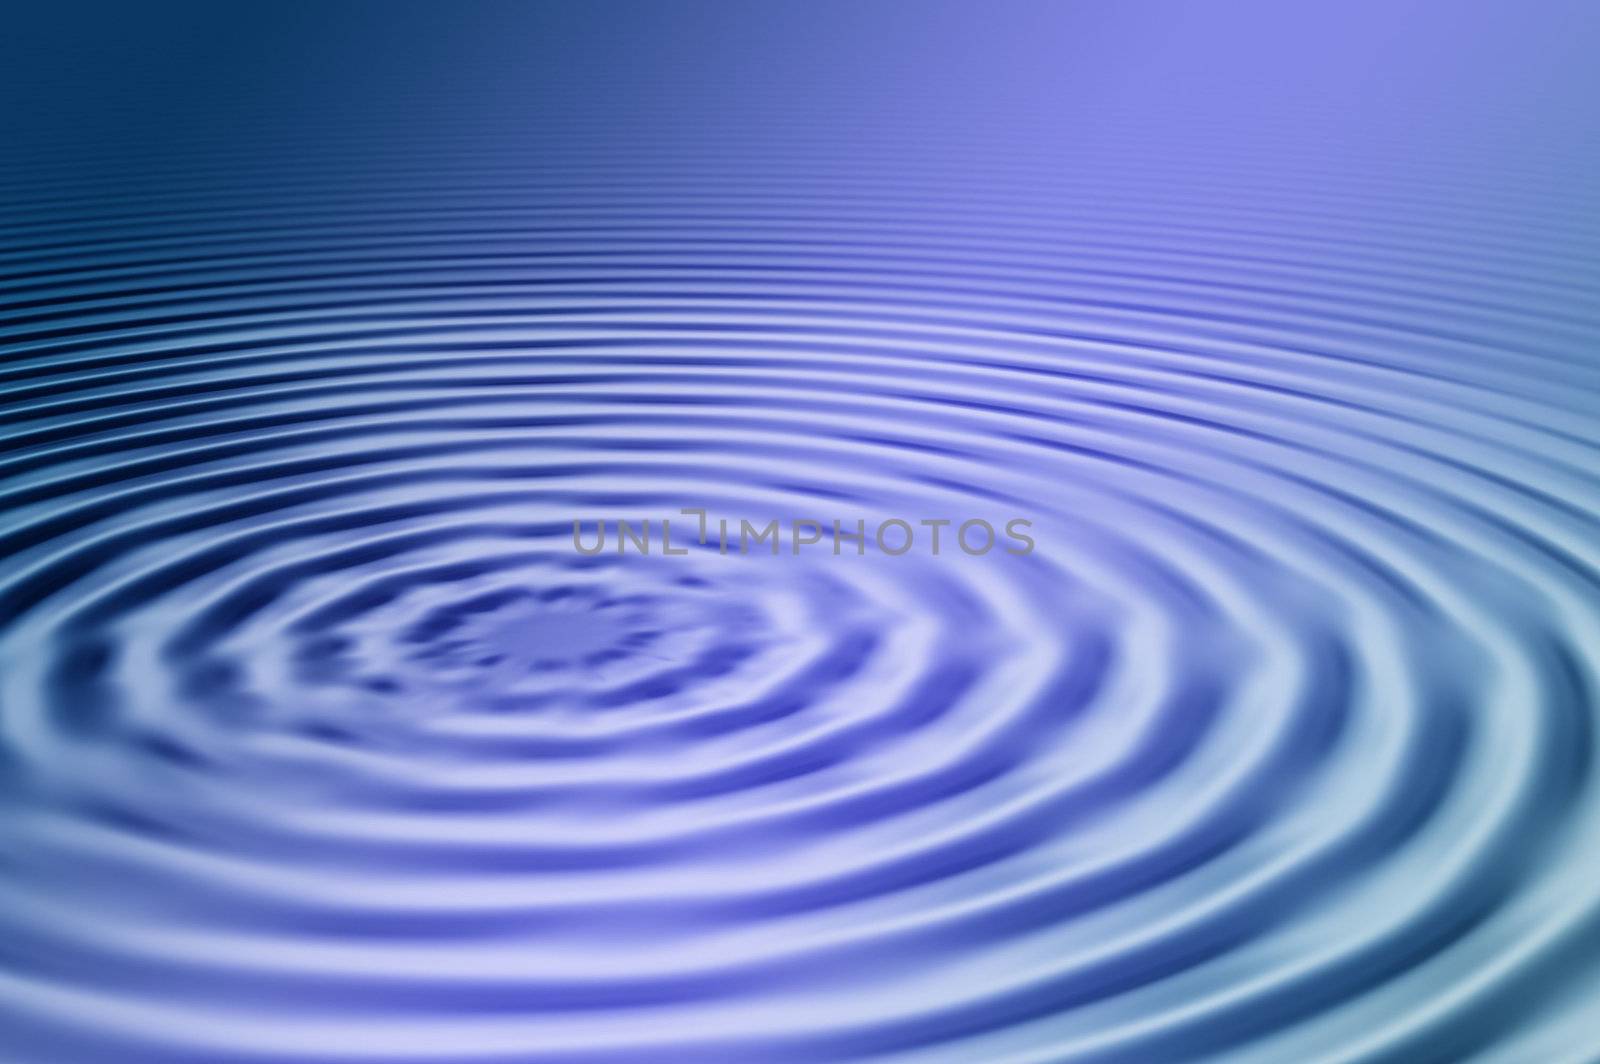 A Colourful Photoshop Illustration of Blue Water Ripples